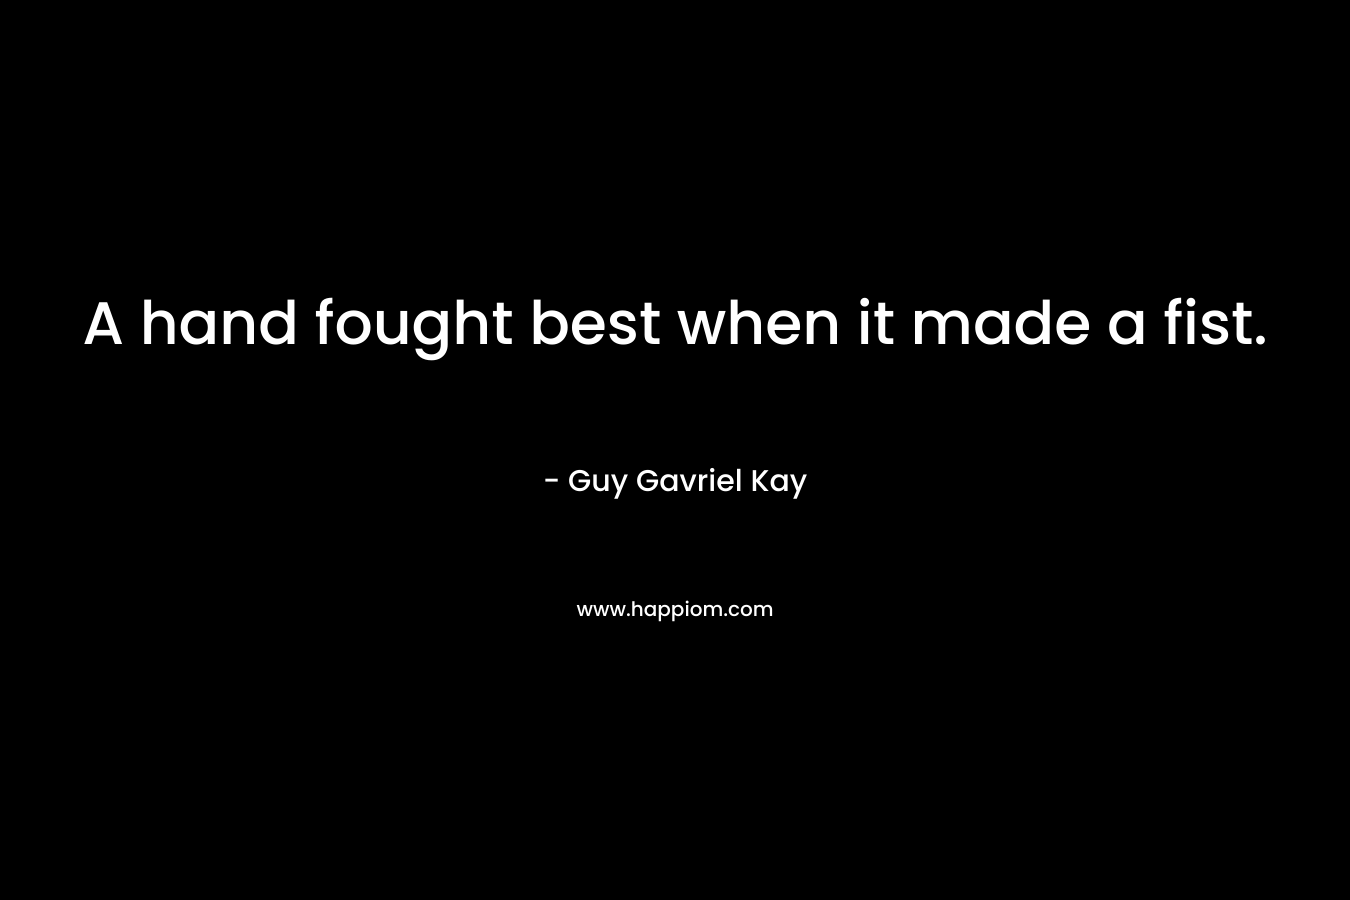 A hand fought best when it made a fist. – Guy Gavriel Kay